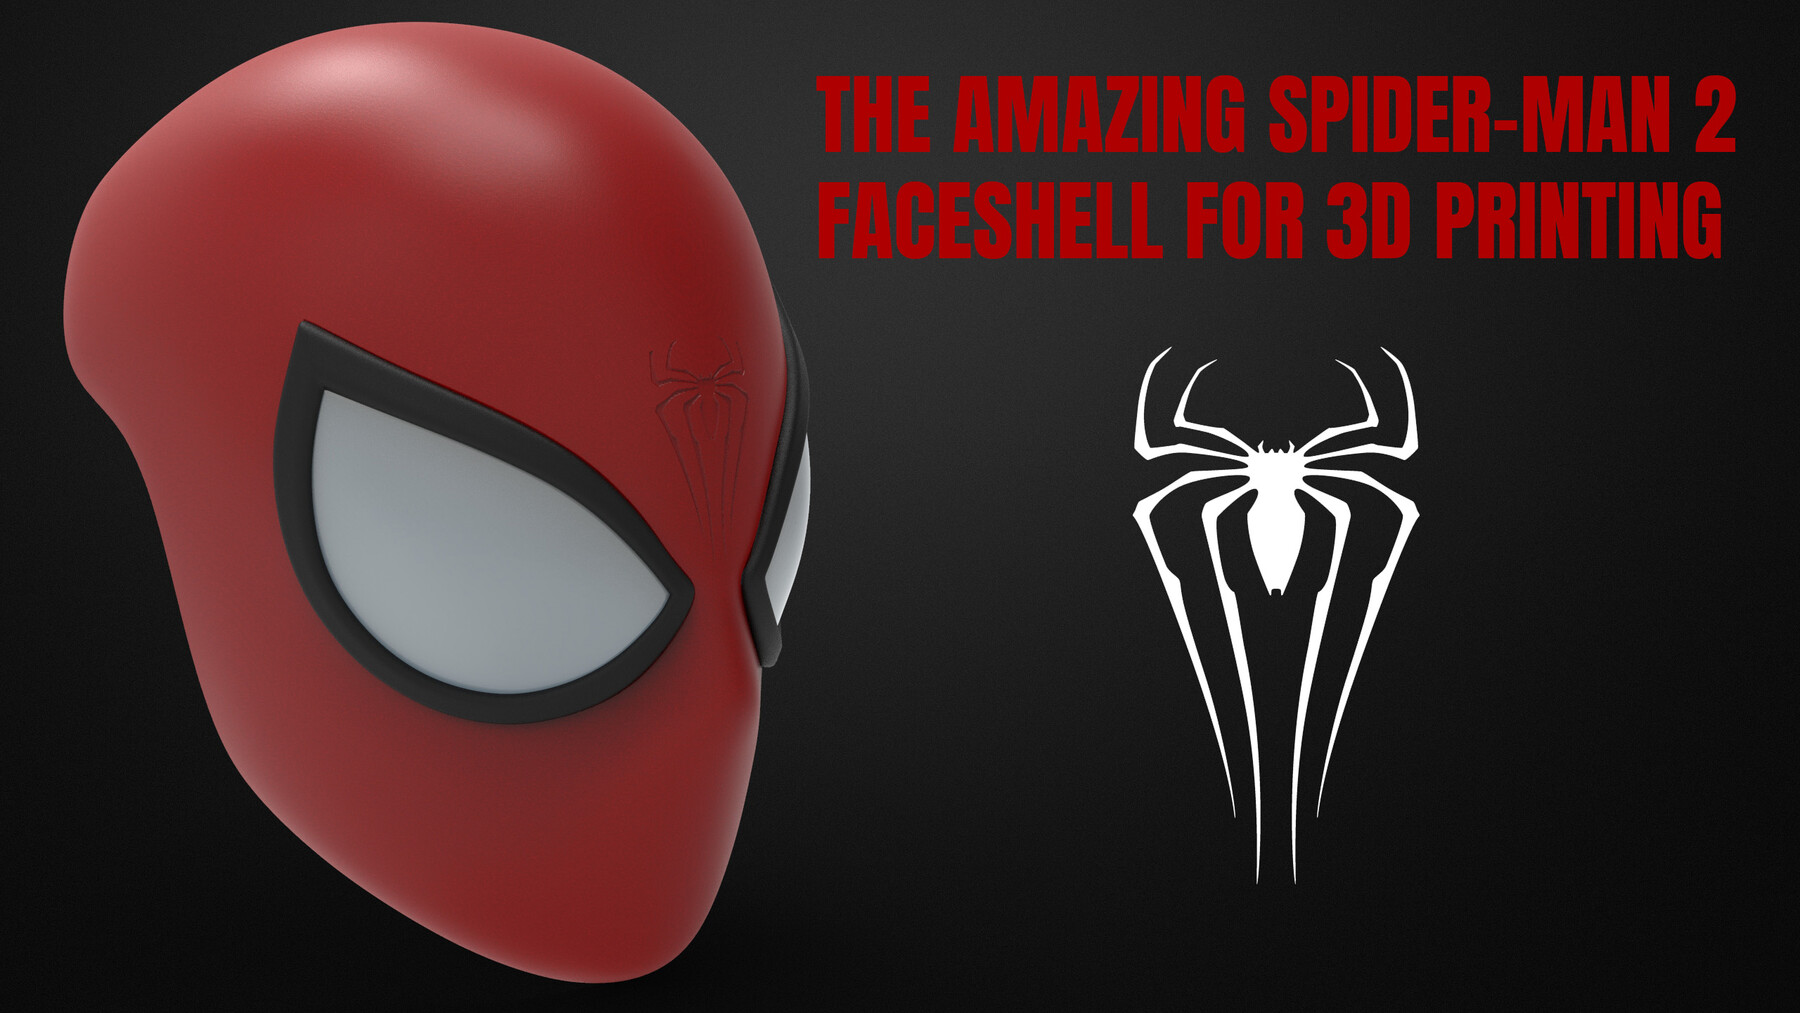 Verder gewoontjes snor ArtStation - THE AMAZING SPIDER-MAN 2 FACESHELL FOR 3D PRINTING | Resources